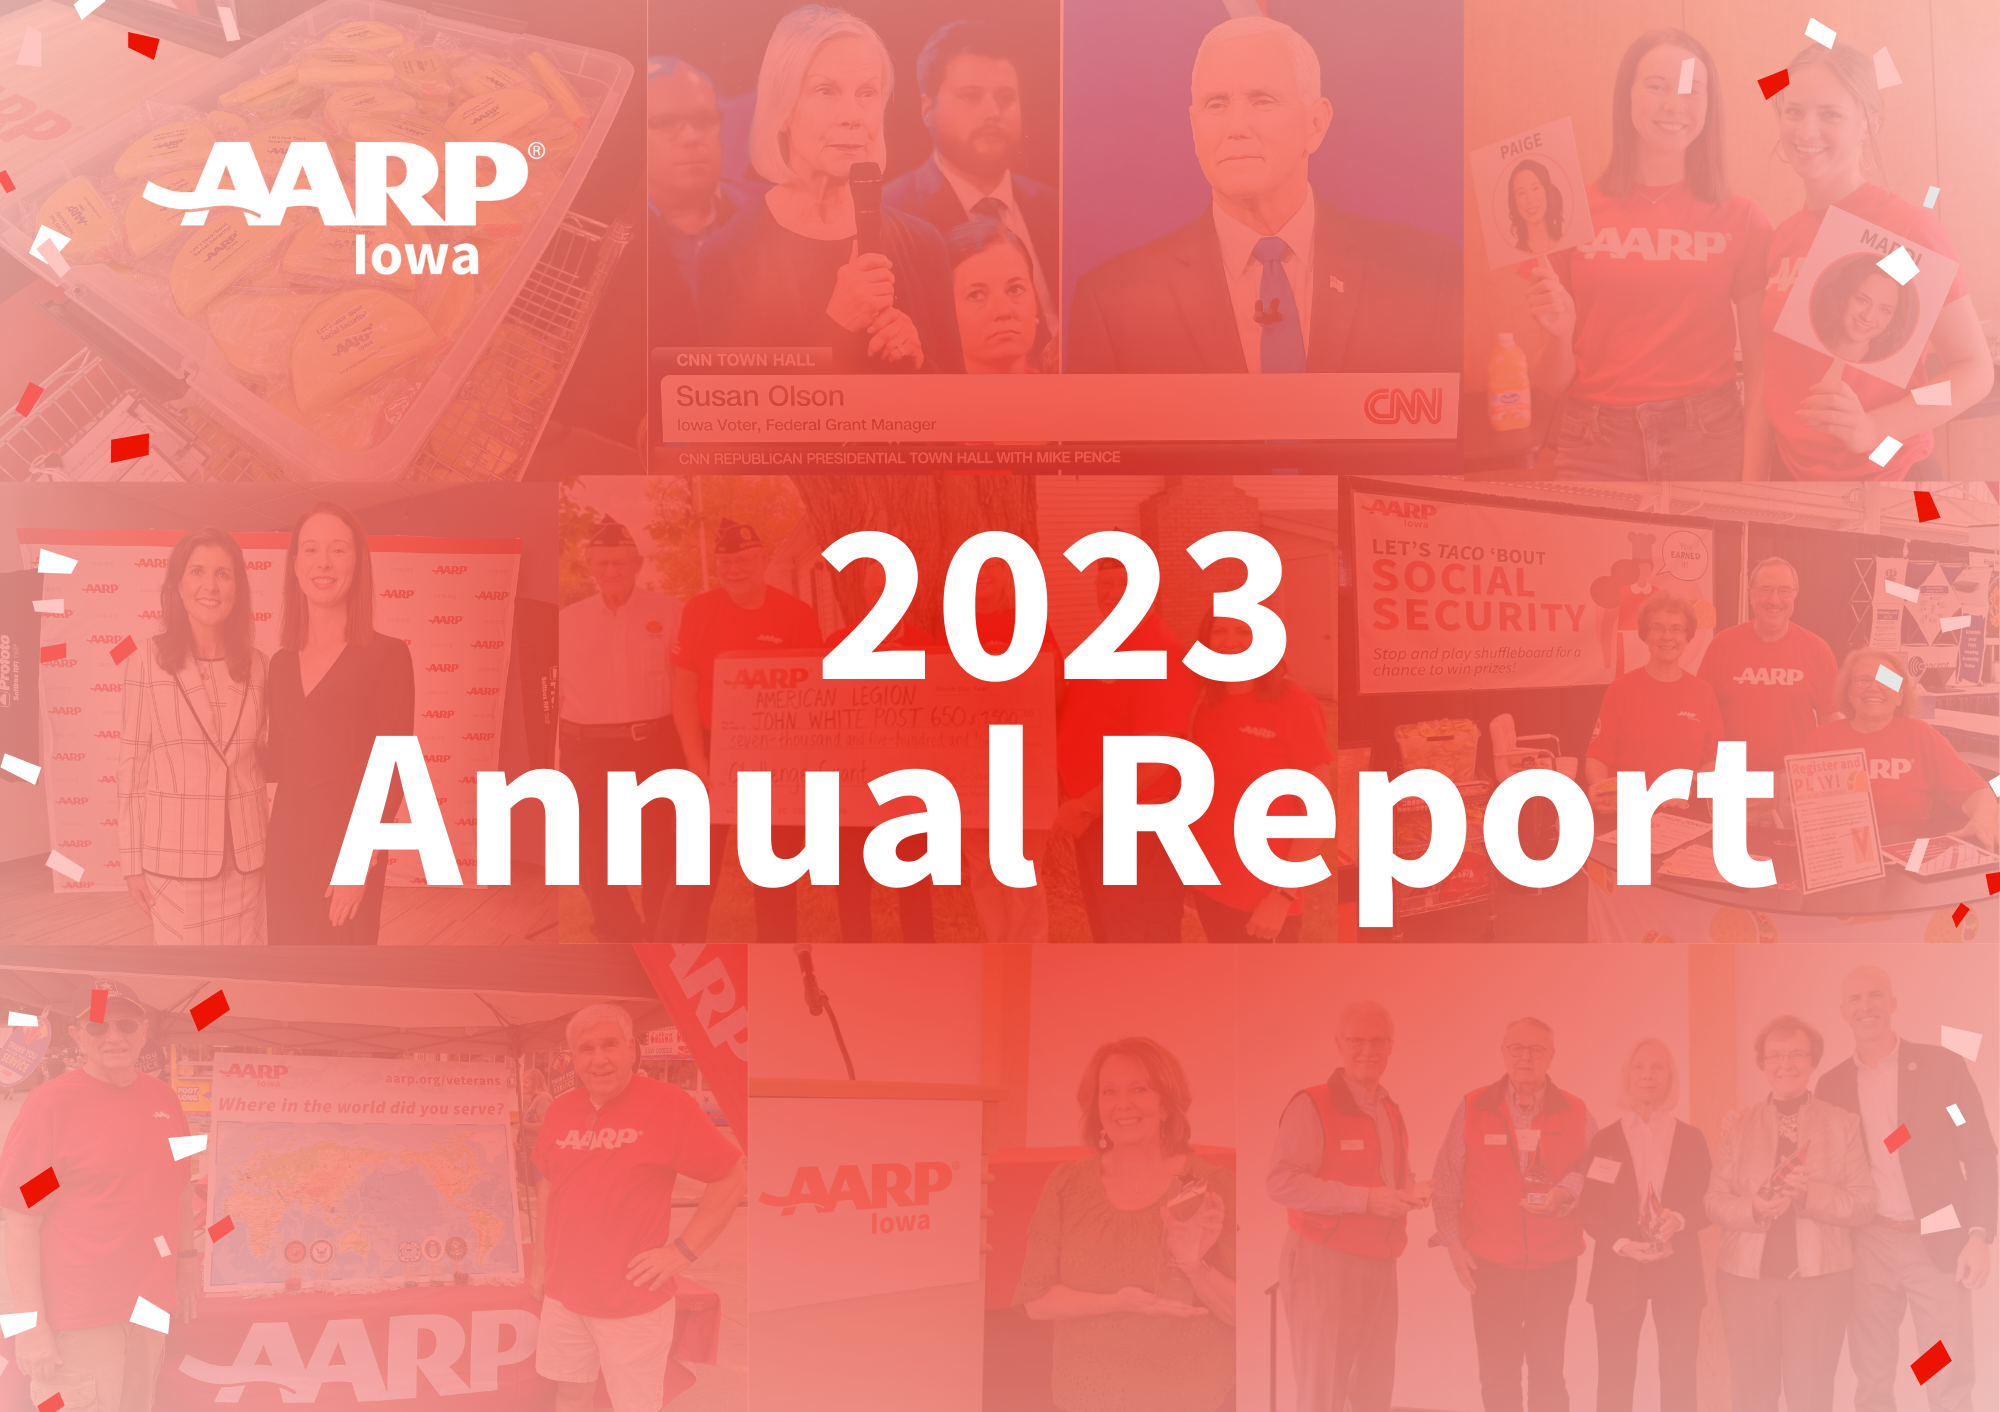 2023 Annual Report Email.png